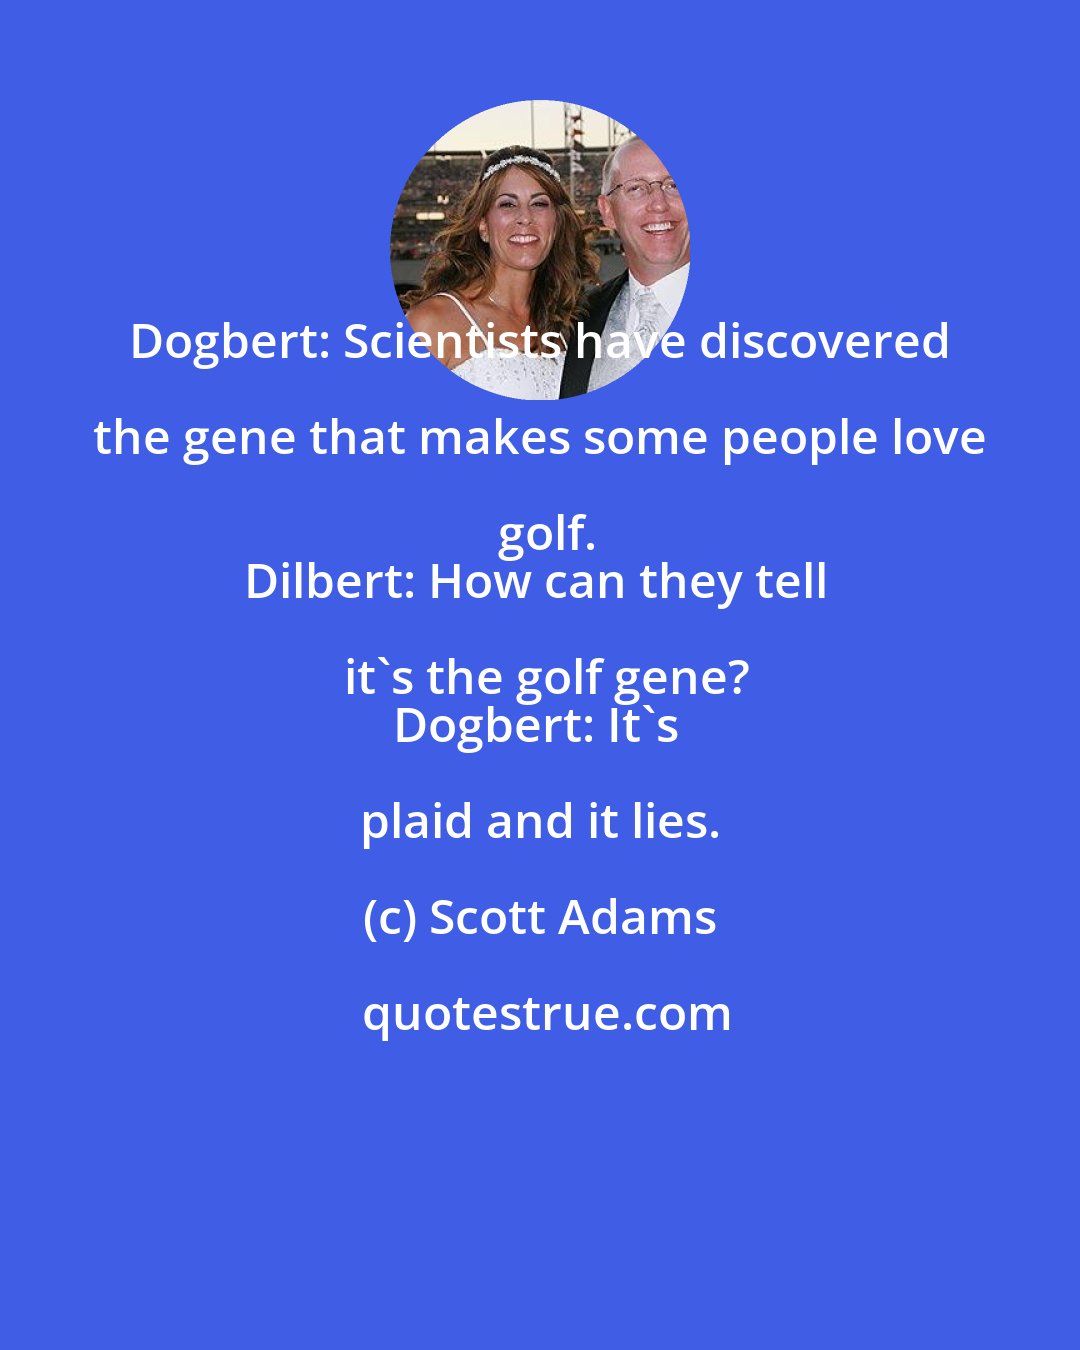 Scott Adams: Dogbert: Scientists have discovered the gene that makes some people love golf.
Dilbert: How can they tell it's the golf gene?
Dogbert: It's plaid and it lies.